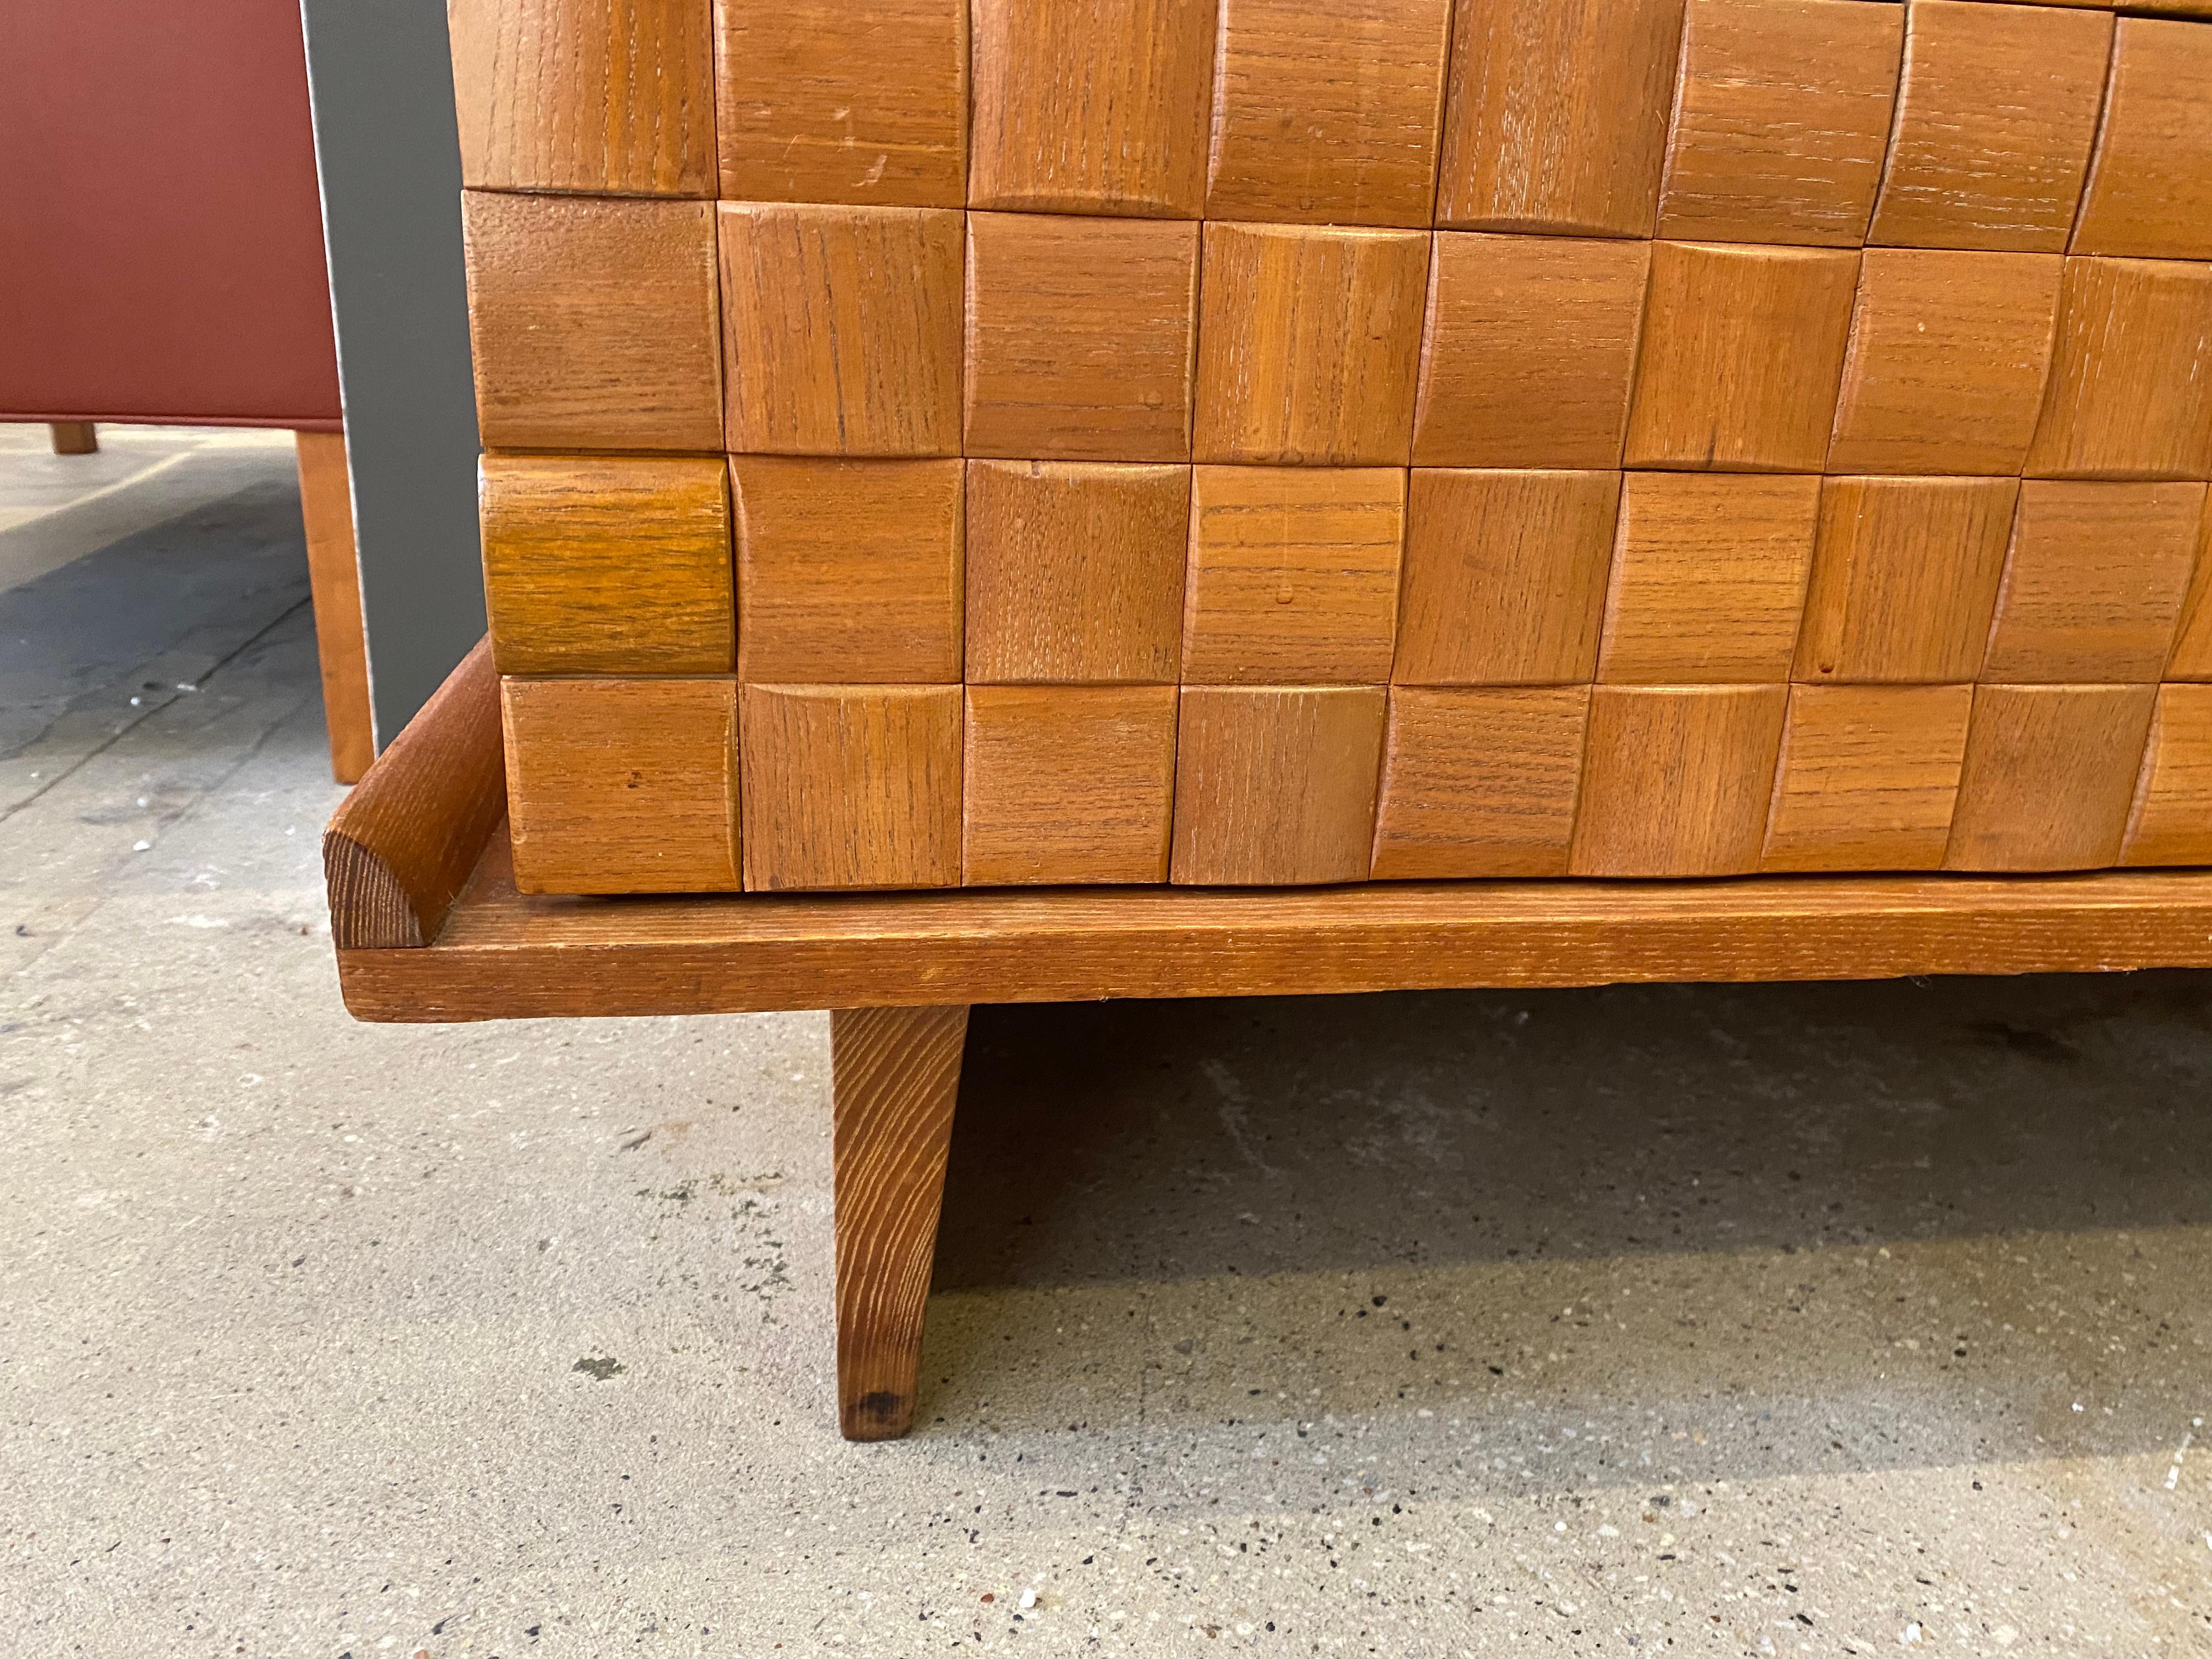 A double dresser / chest of drawers in oak with basket weave front pattern made out of solid oak squares. Designed by Paul László for Brown Saltman, 1950s, America. Marked in top right drawer. Paul László is considered among the most important